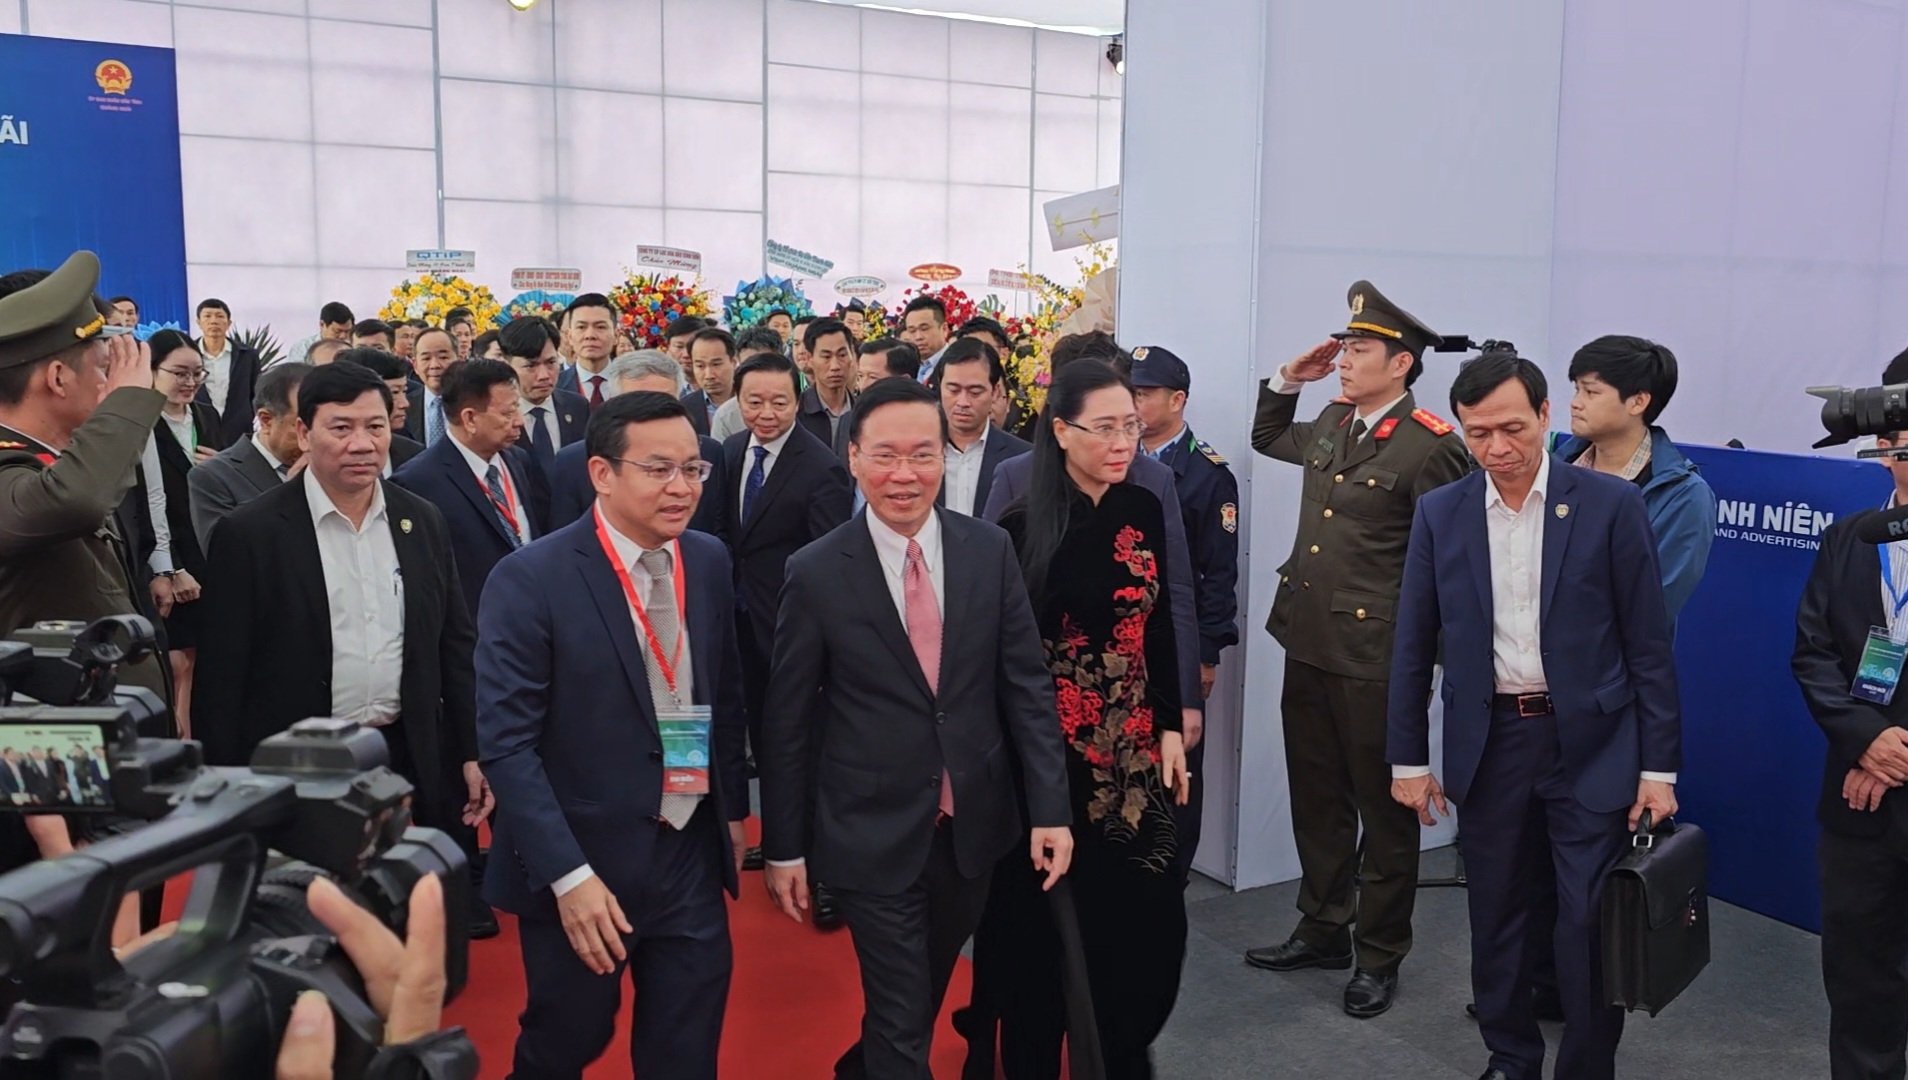 President Vo Van Thuong and the delegation attended the 10th anniversary of VSIP Quang Ngai